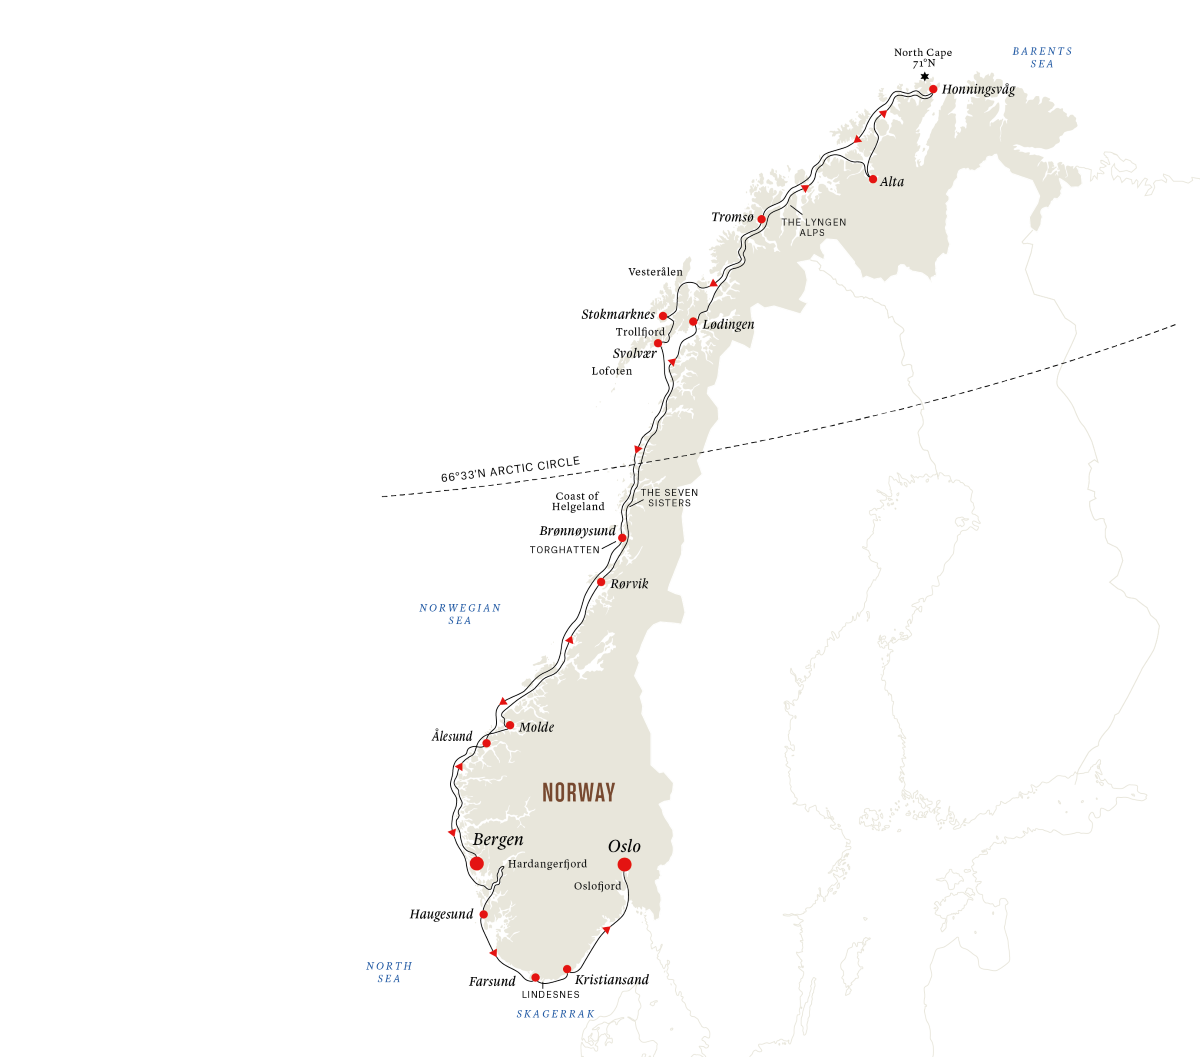 The North Cape Express - Full Voyage from Bergen to Oslo